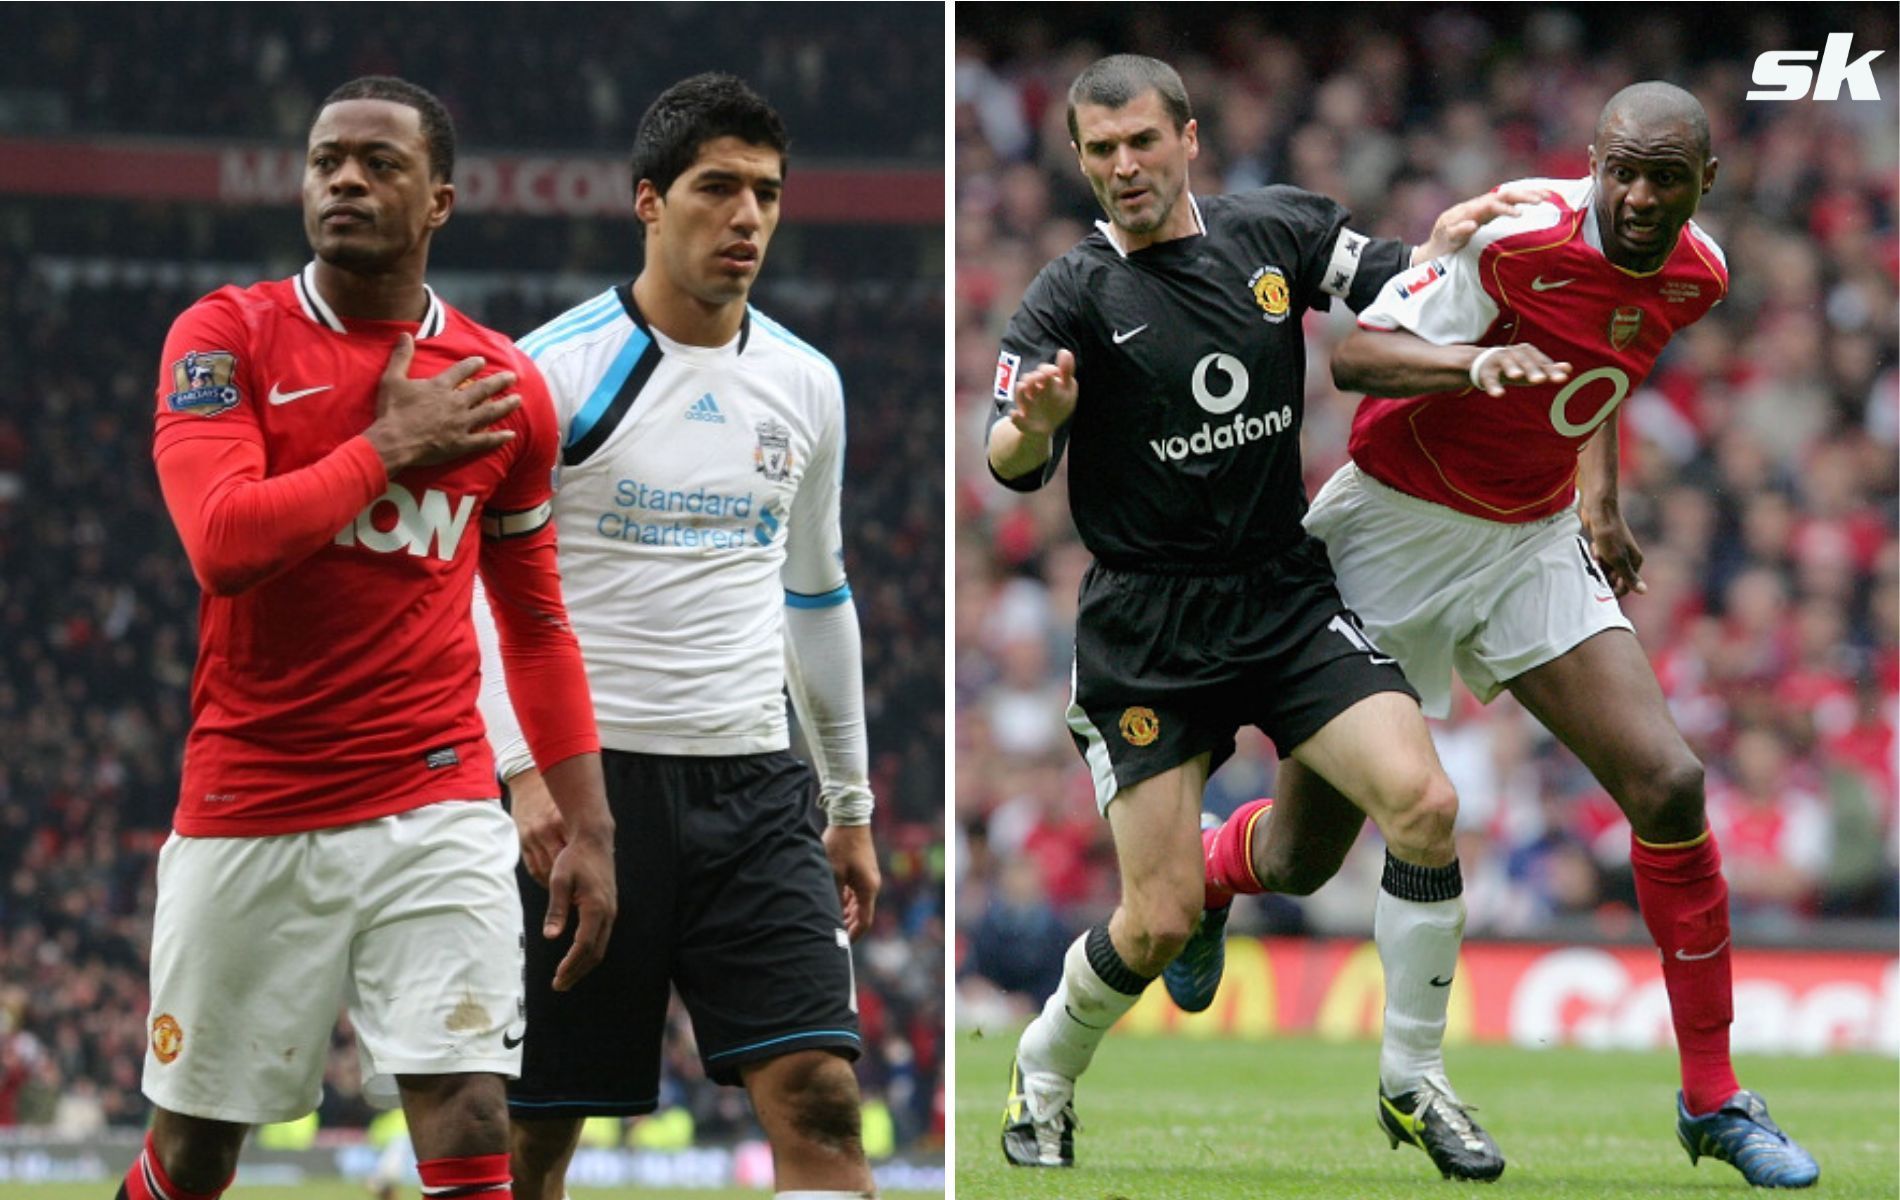 The Premier League has seen many enticing player rivalries over the years.